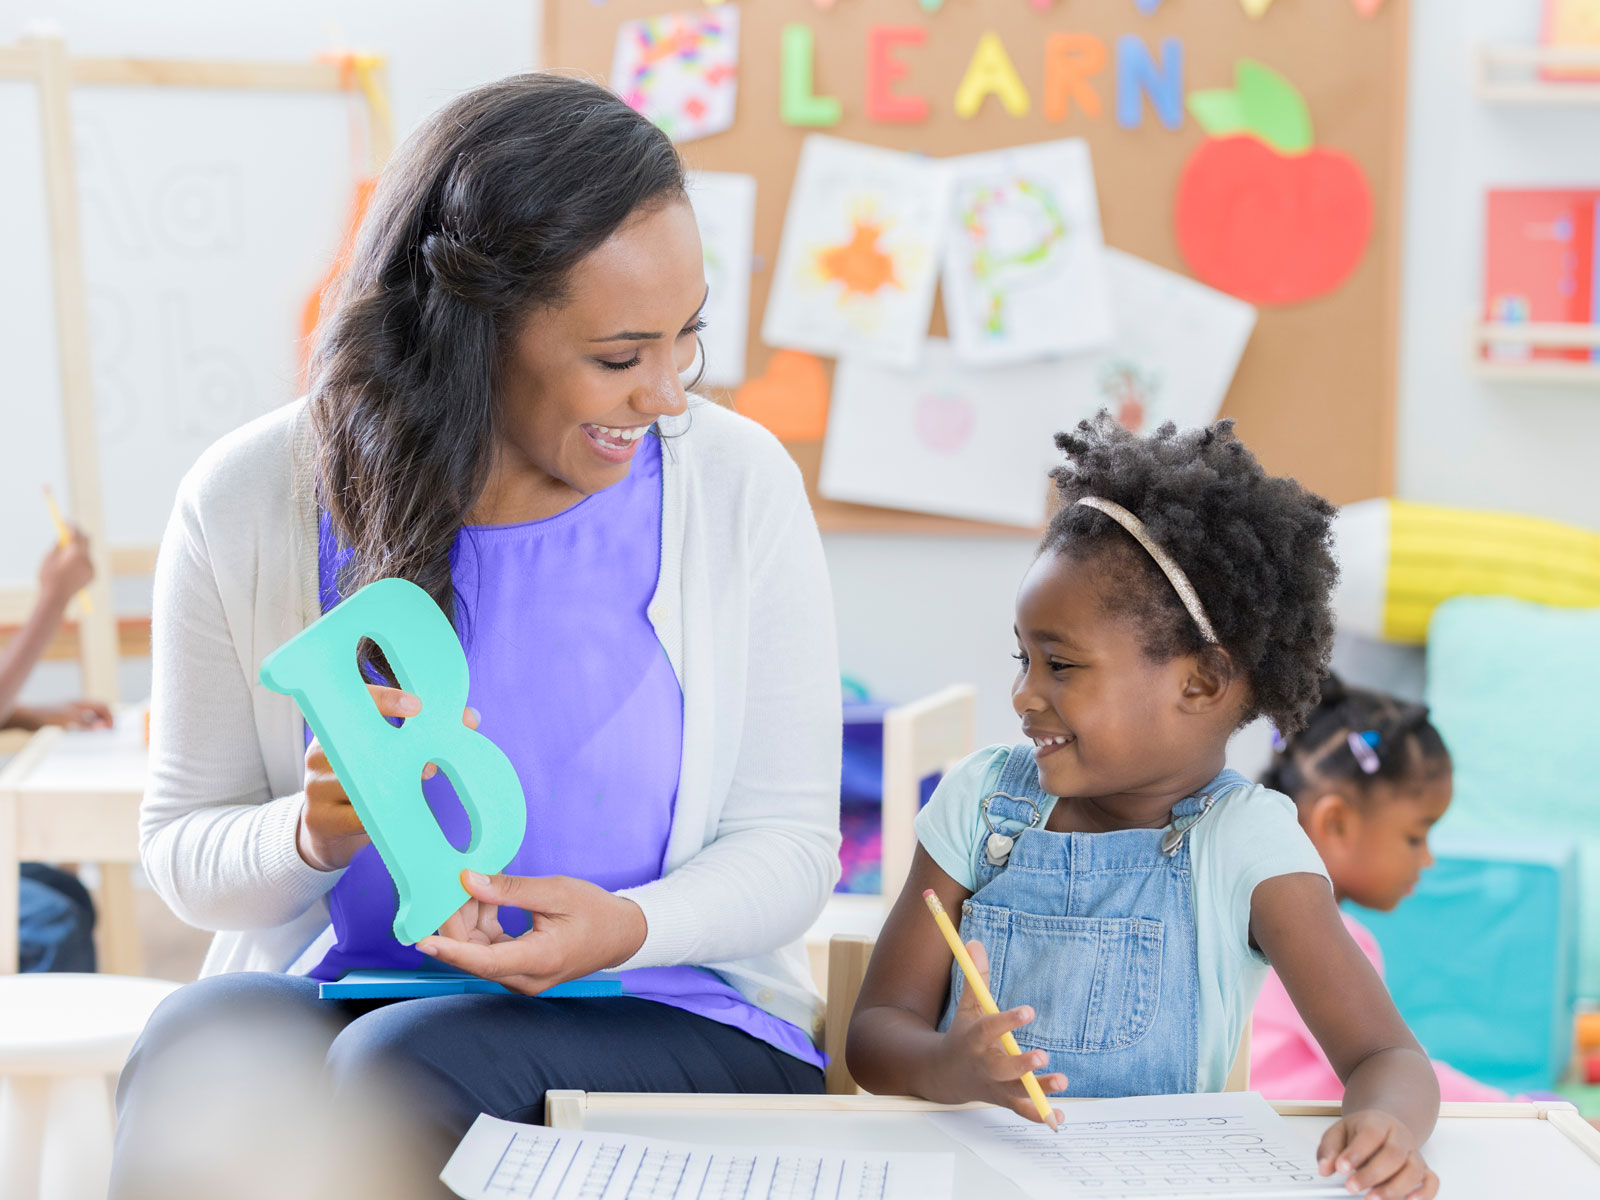 Daycare teacher holding letter B for young girl